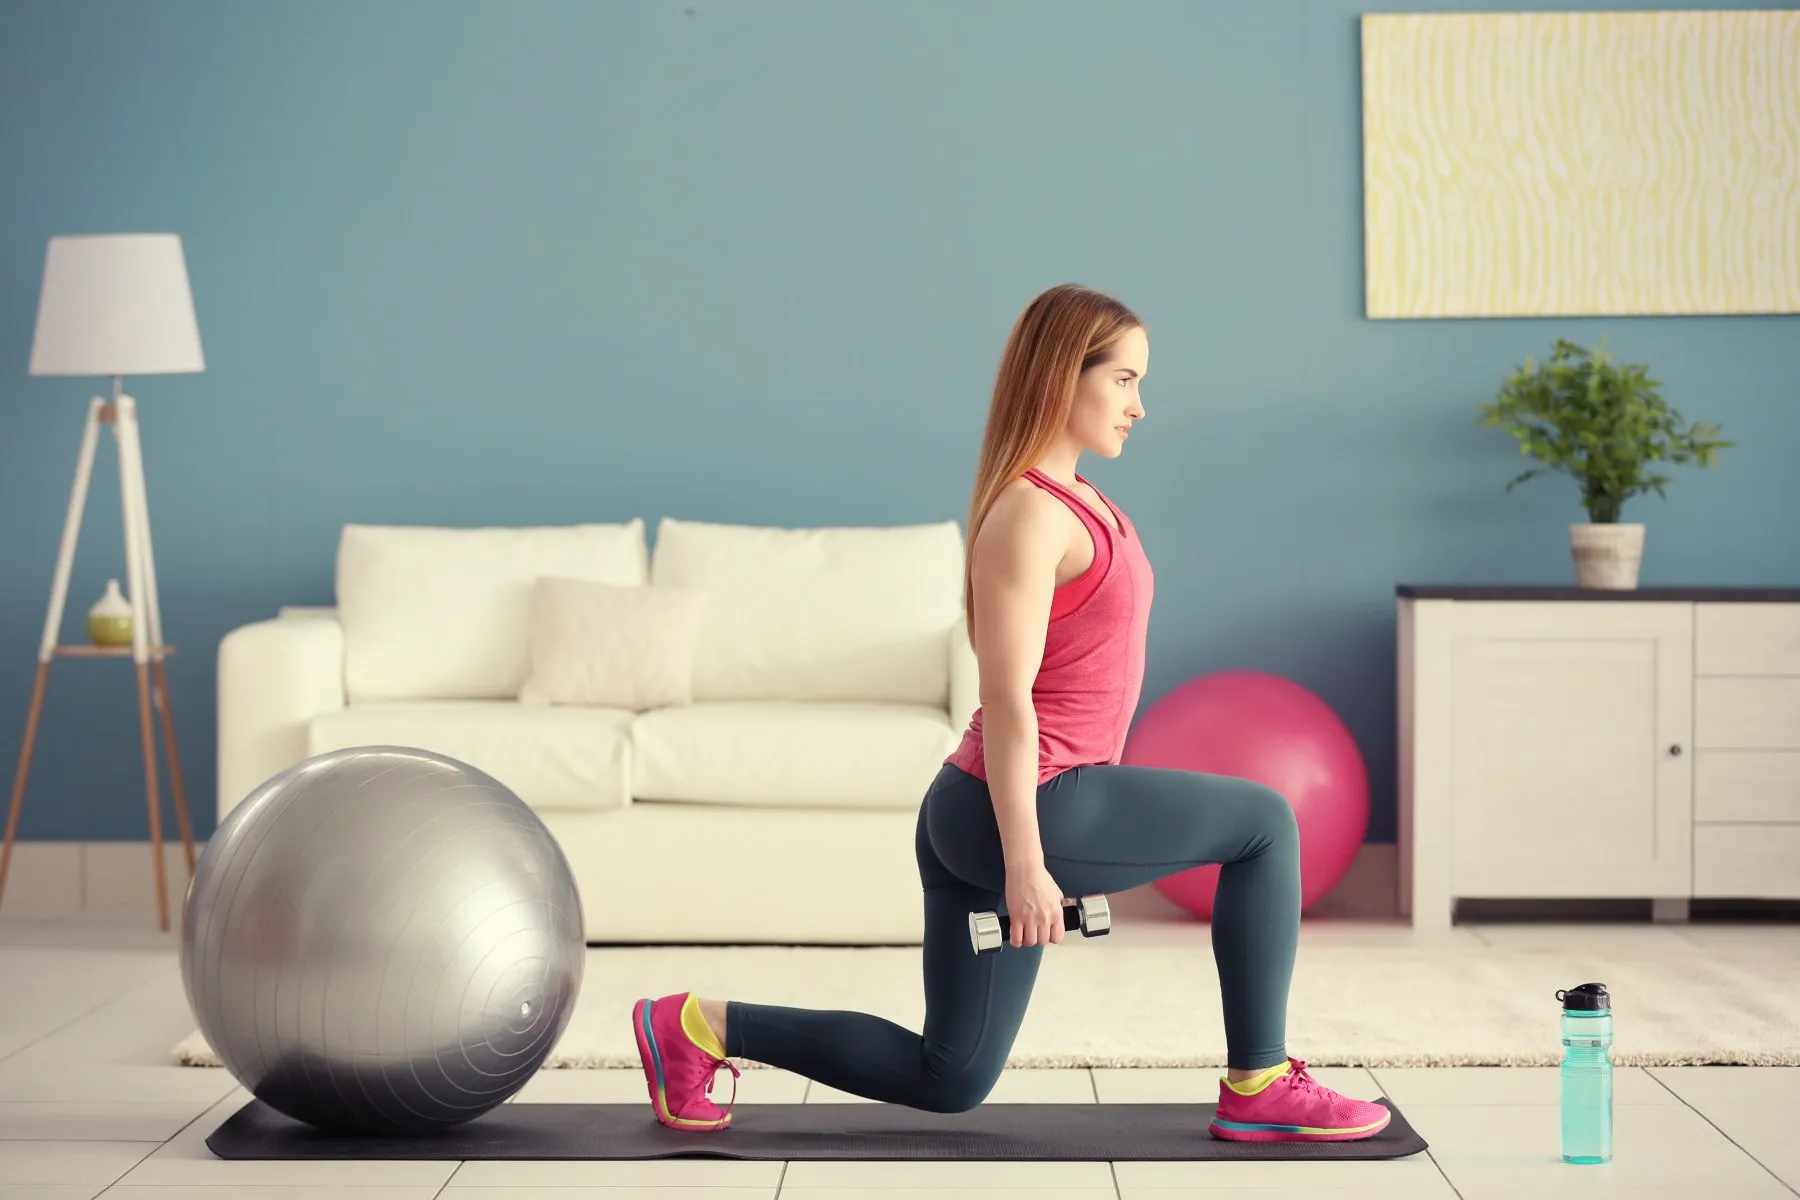 Wondering How To Make Your Home Workout Rock? Get The Right Setup.